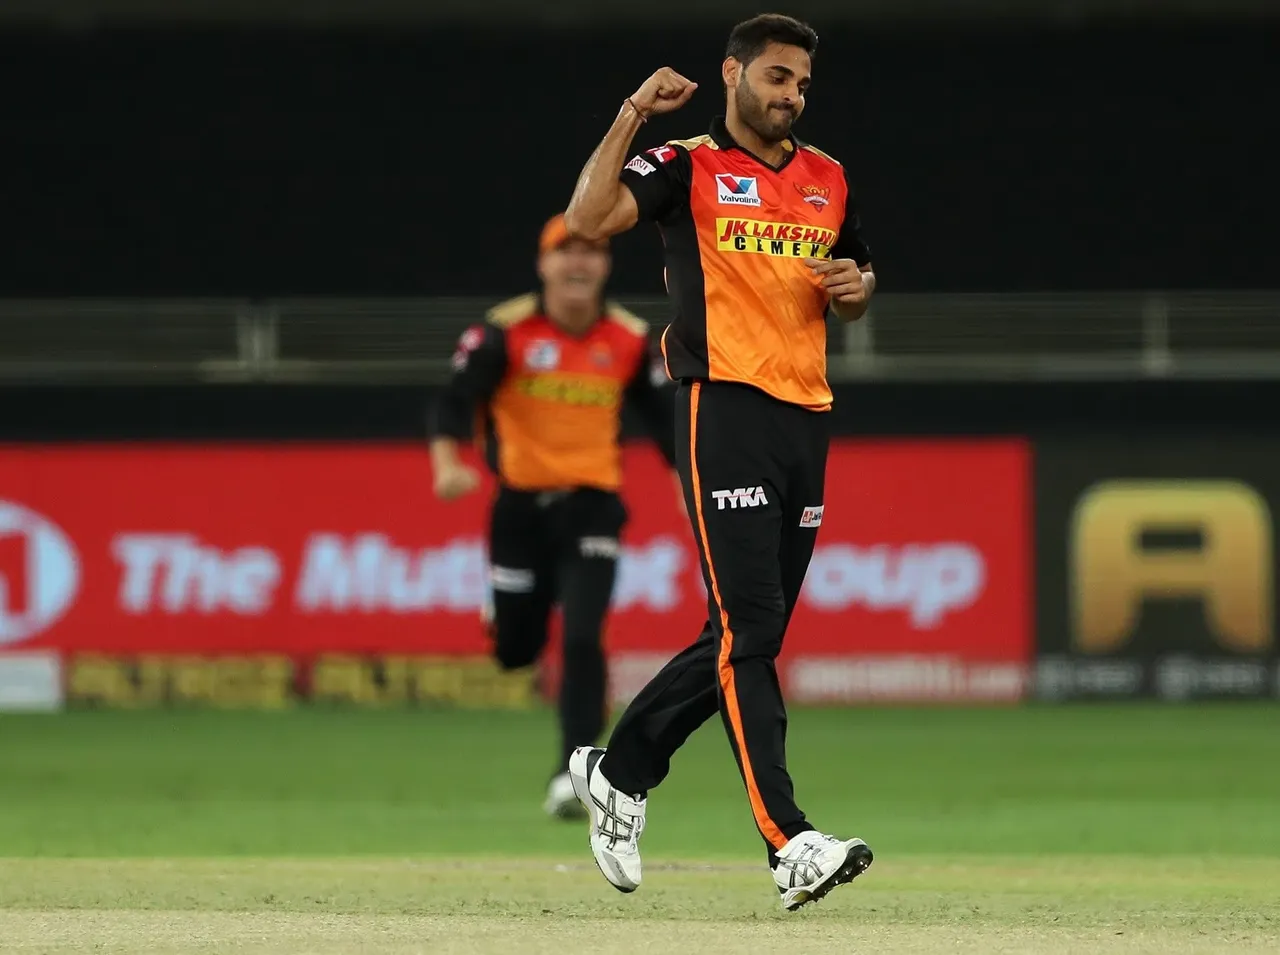 Best bowling figures in Indian Premier League for each team